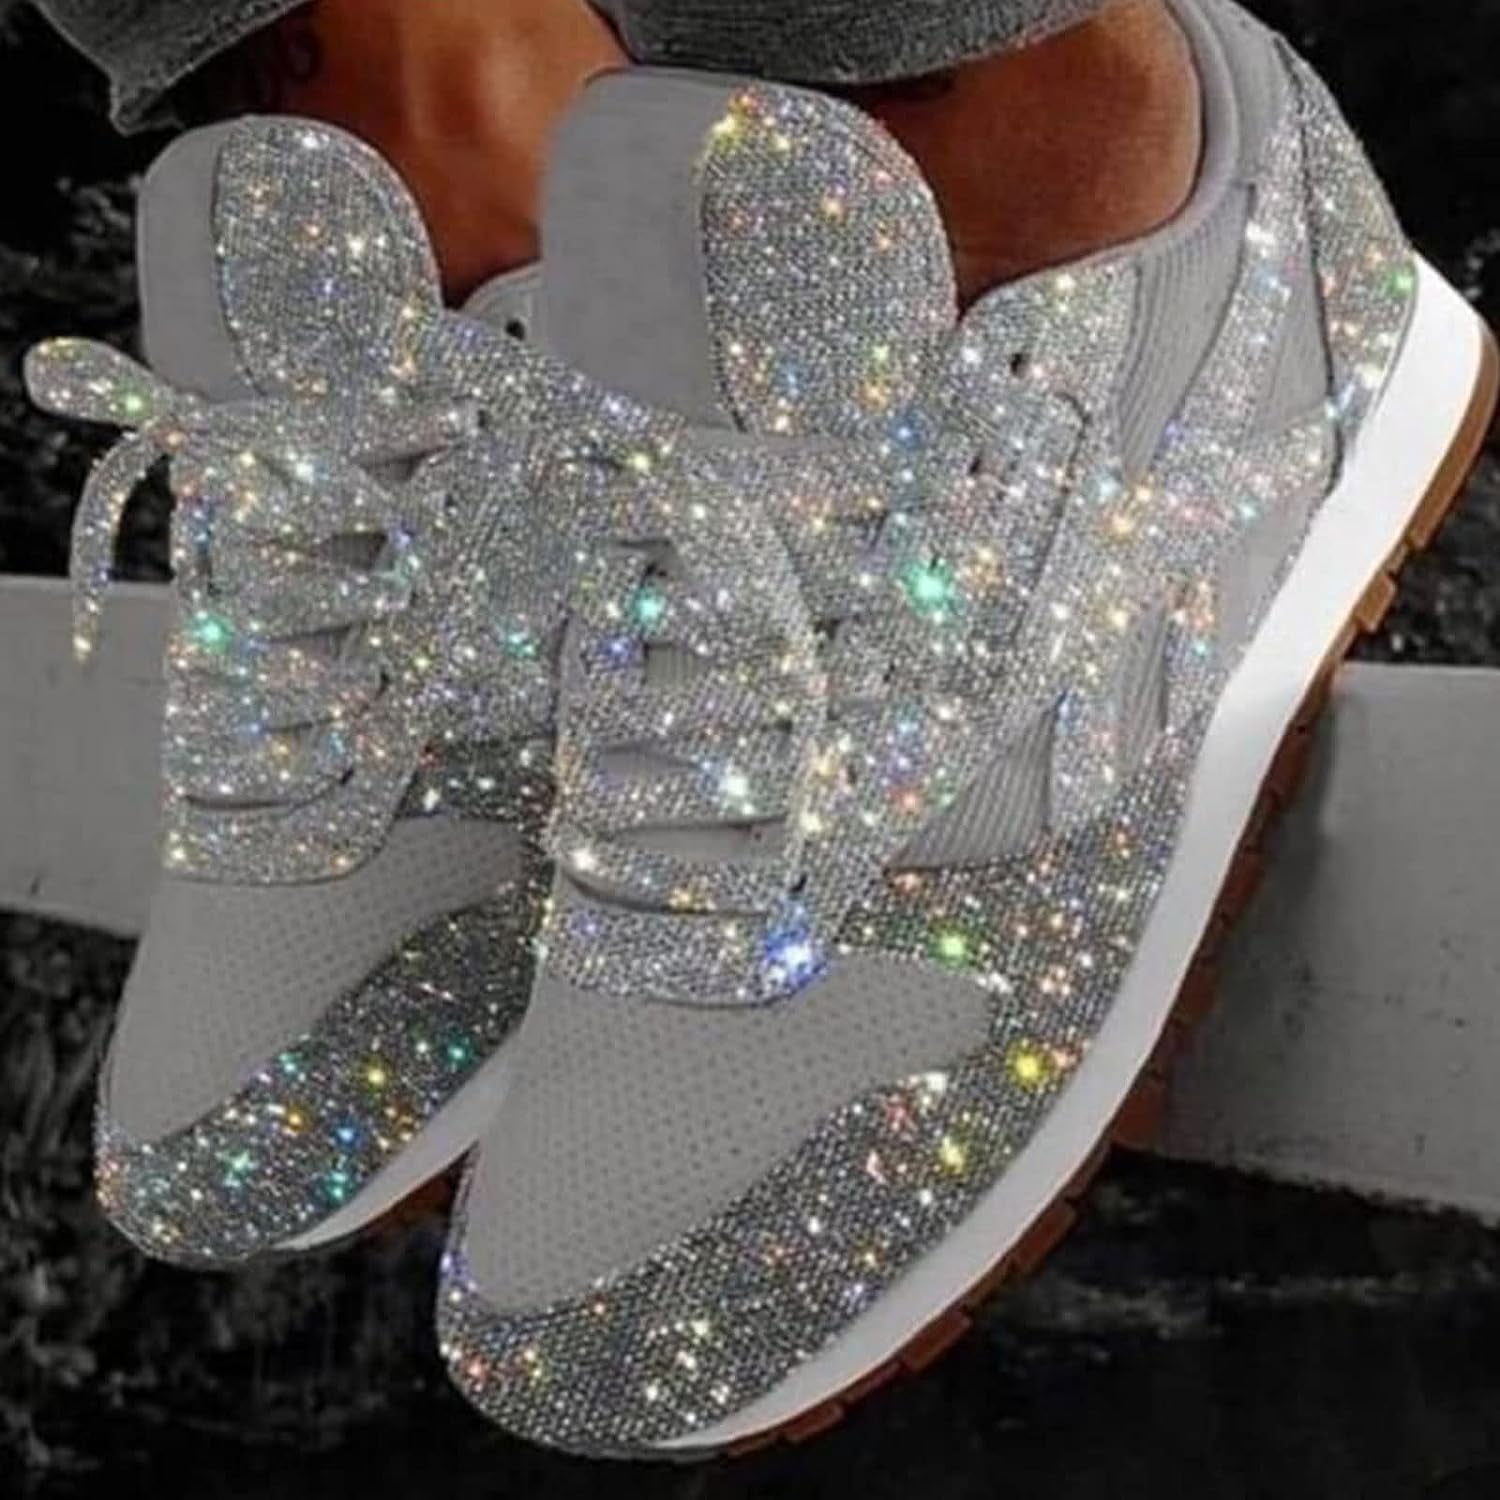  Hbeylia Sequin Sneakers For Women Rhinestones Sparkly Chunky  Bottom Lace Up Walking Running Tennis Shoes Breathable Anti Slip Low Top  Fall Walking Driving Play Sneakers Athletic Sport Shoes : Clothing, Shoes